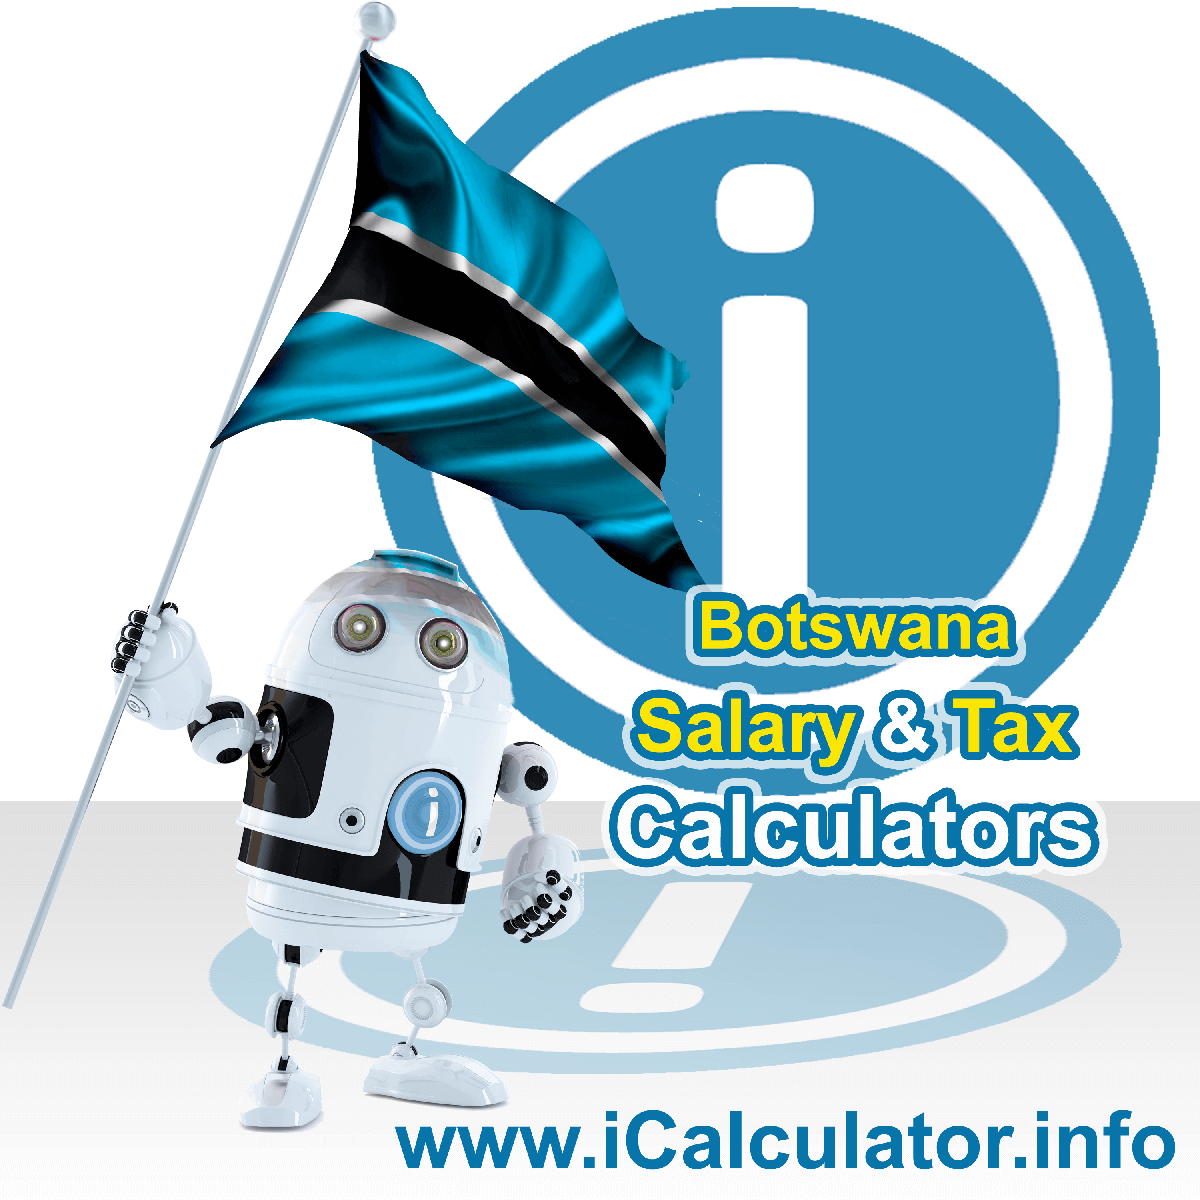 Botswana Wage Calculator. This image shows the Botswana flag and information relating to the tax formula for the Botswana Tax Calculator